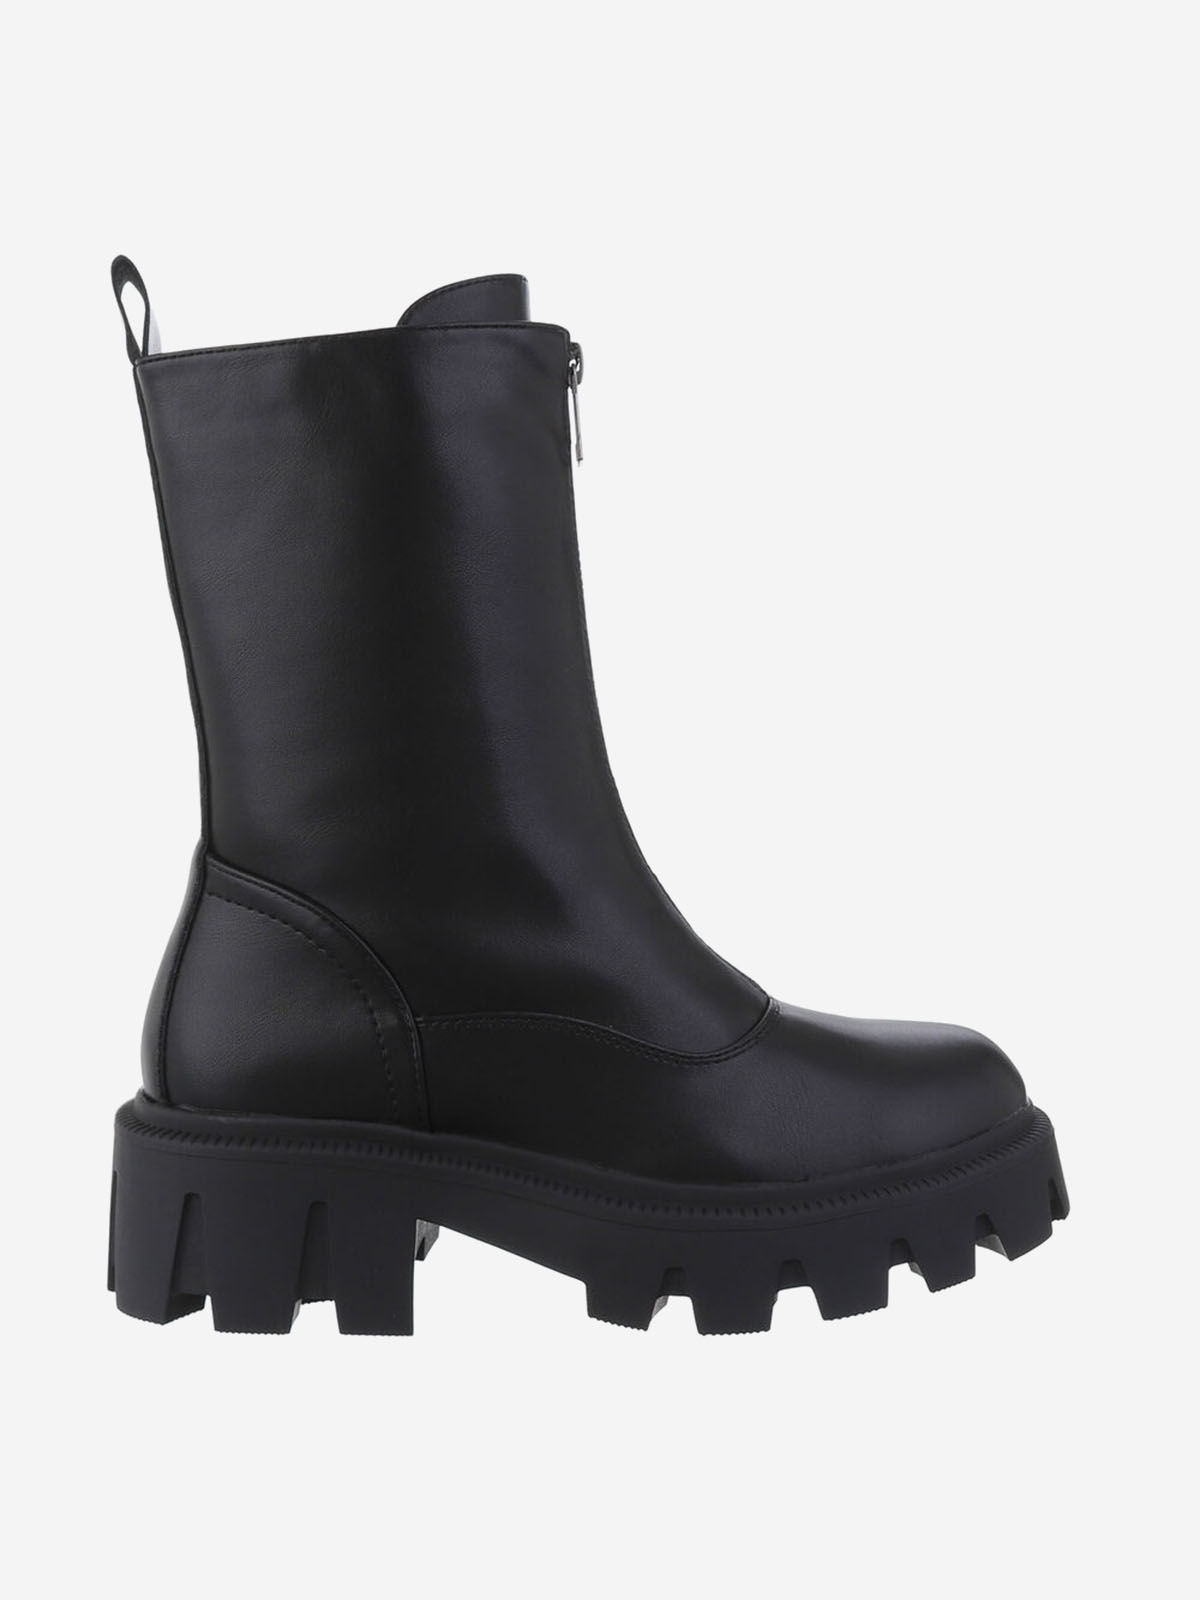 Women's ankle boots with a zipper in the front in black